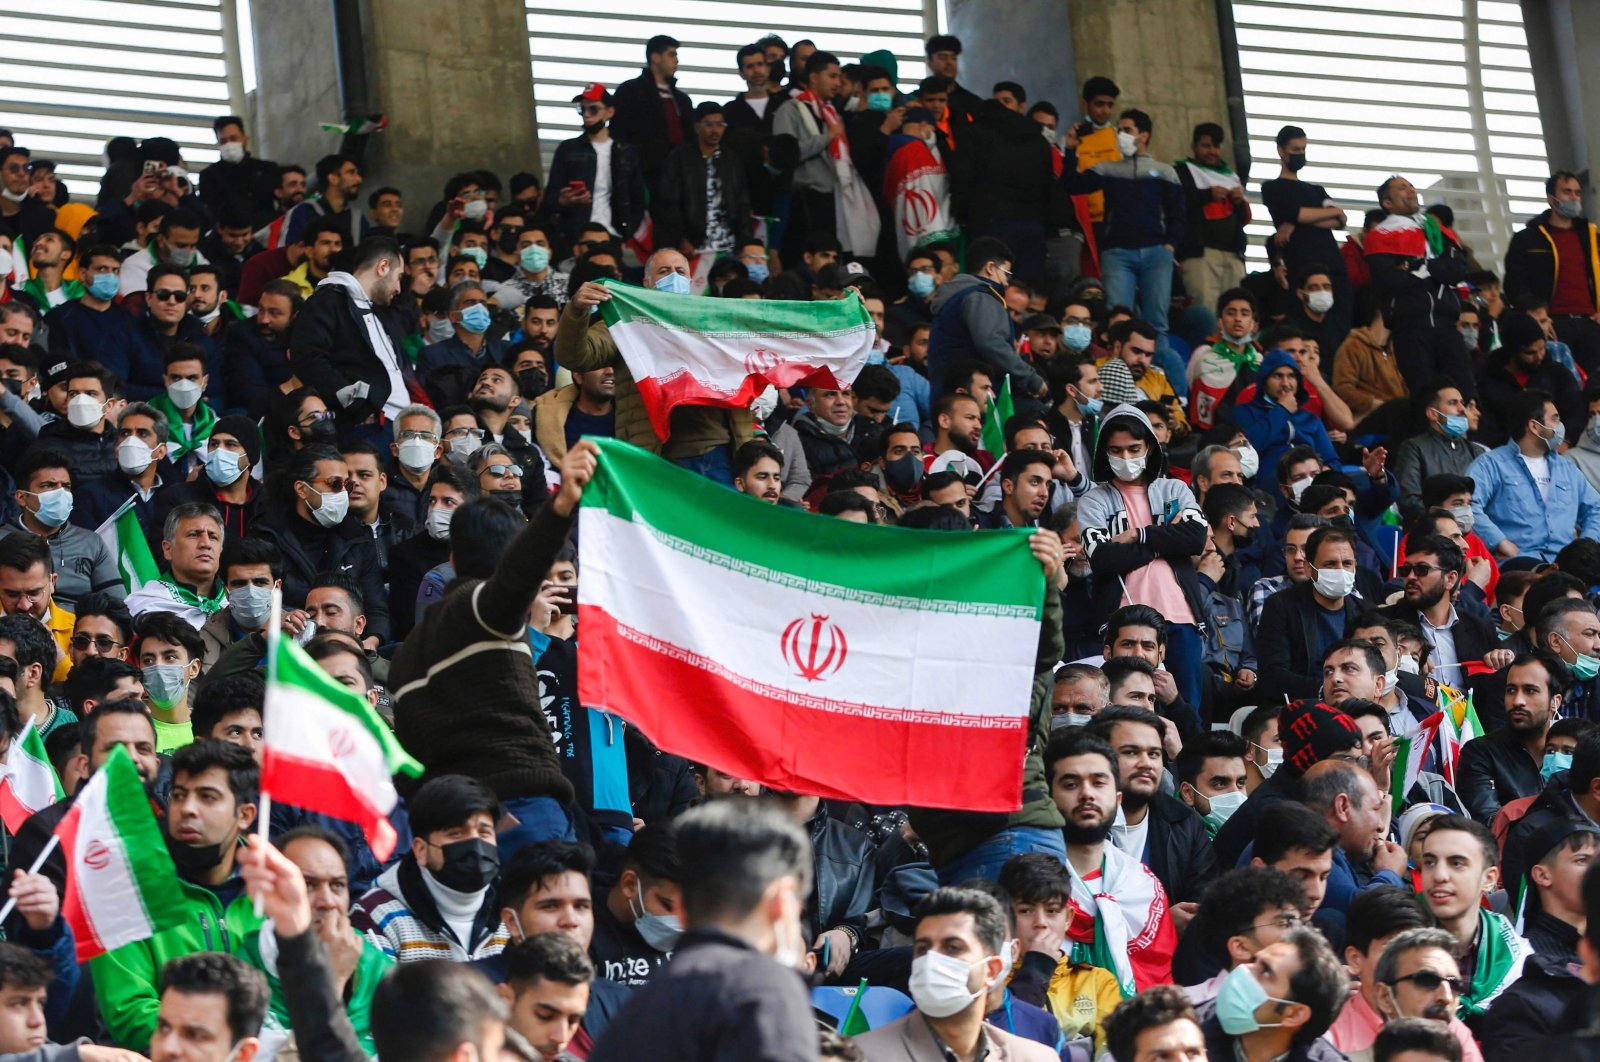 Iran supporters wave the national flag during a World Cup qualifier against Lebanon, Mashhad, Iran, March 29, 2022. (AFP Photo)